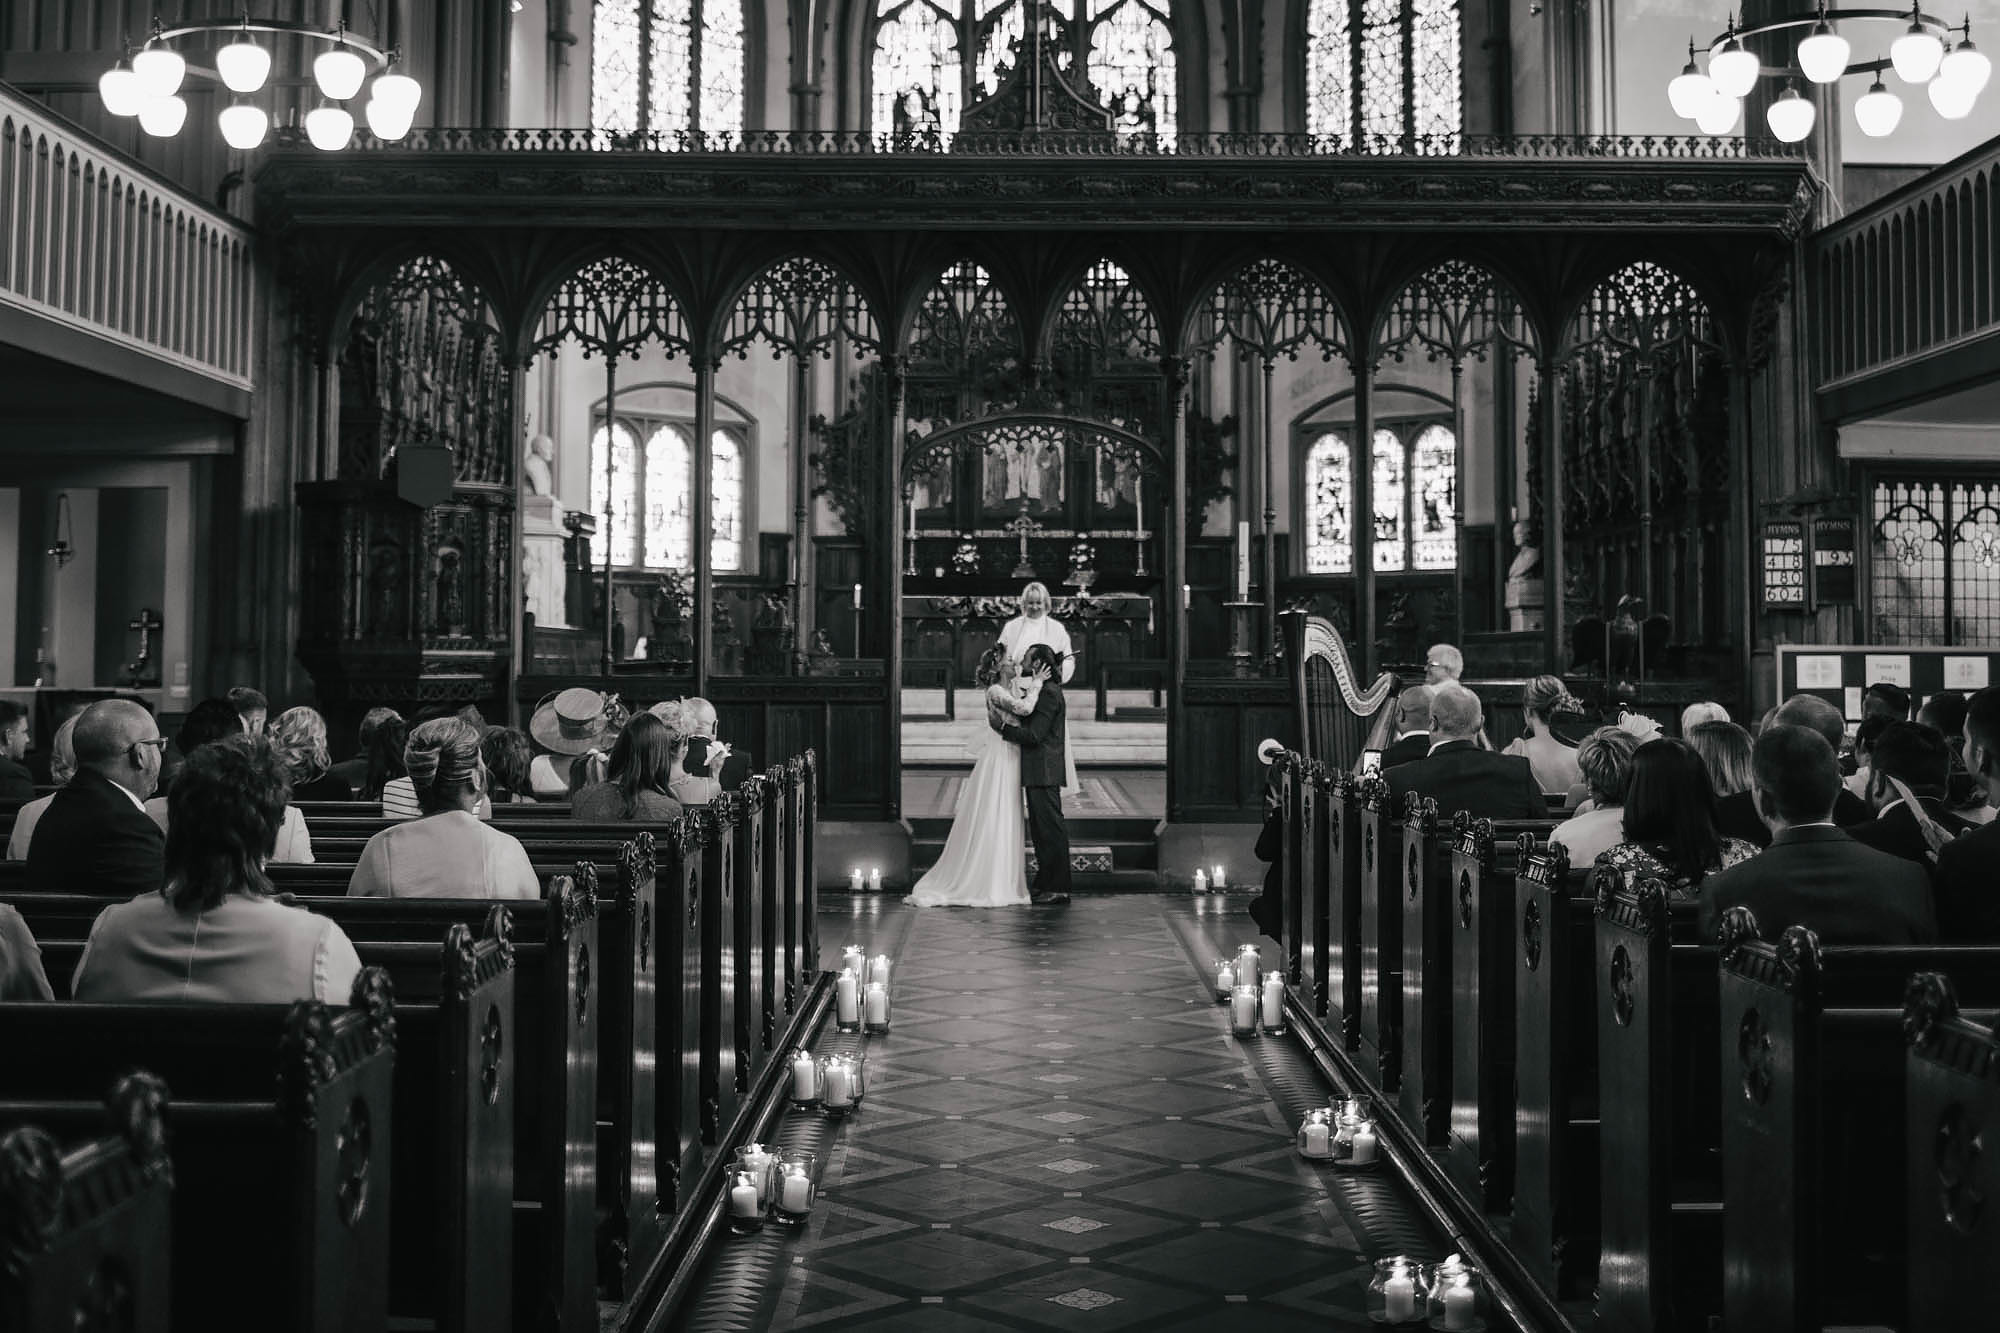 Bride and groom share their first kiss at the church on their wedding day